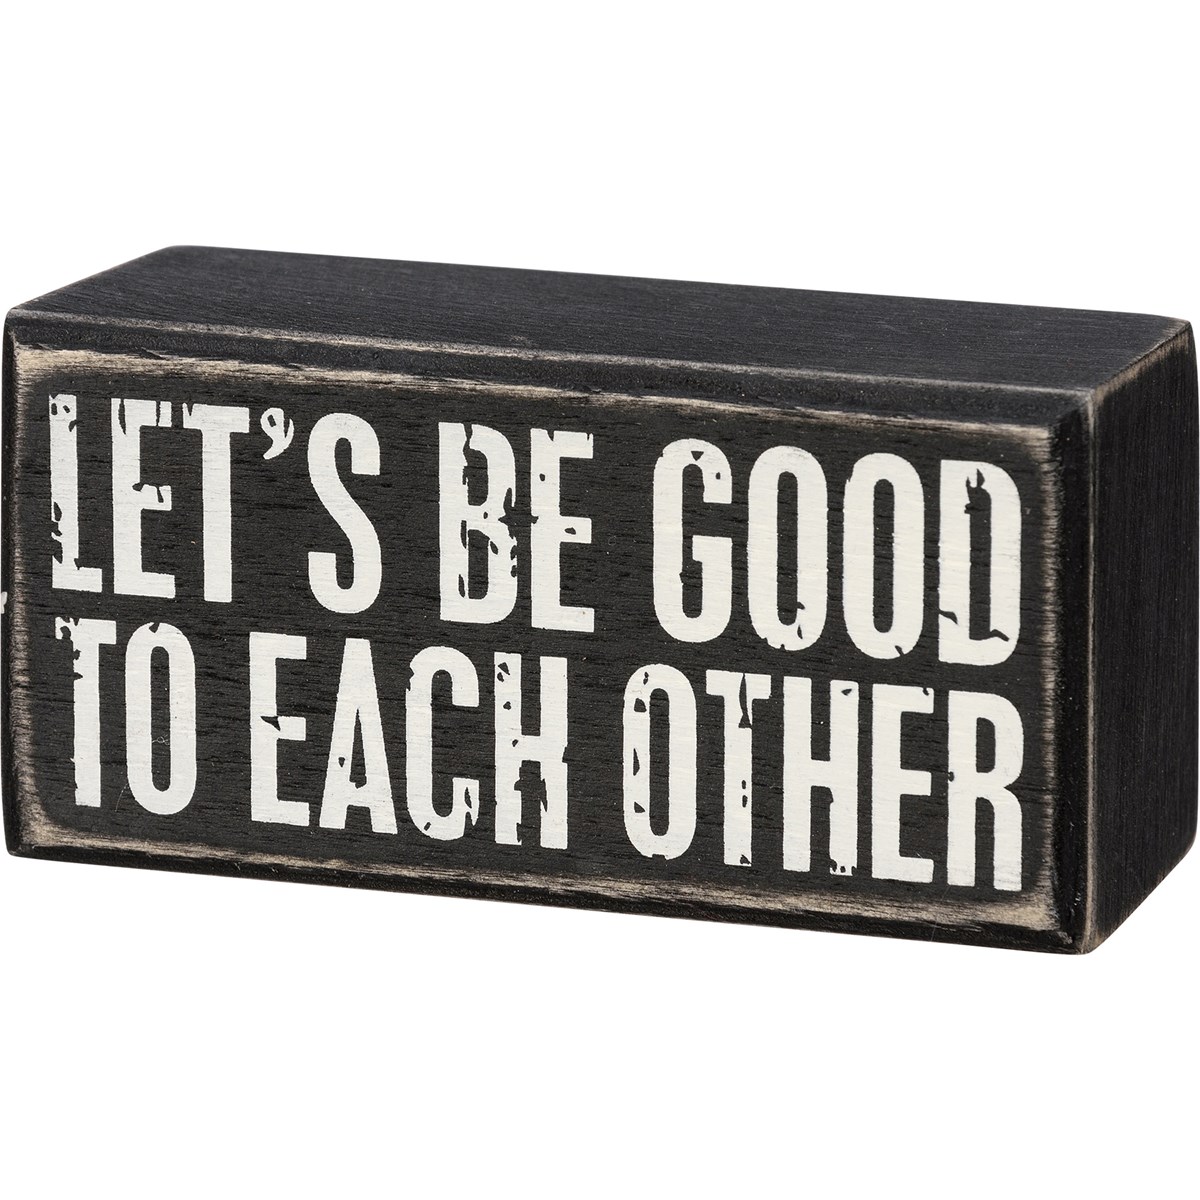 Let's Be Good To Each Other Box Sign - Wood